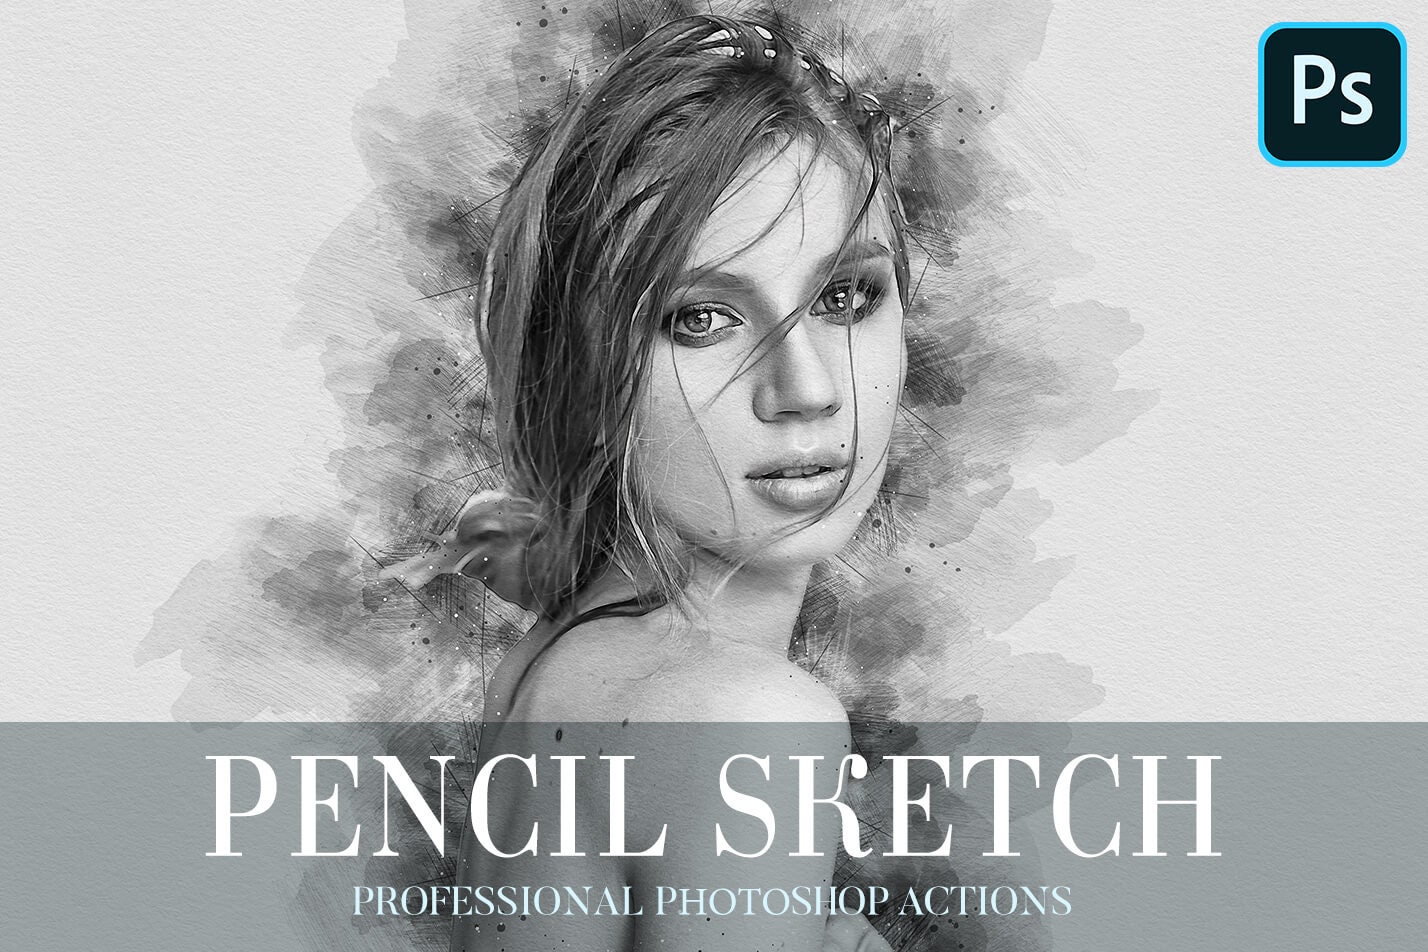 Pencil Sketch Action in Adobe Photoshop - Free Download - YouTube